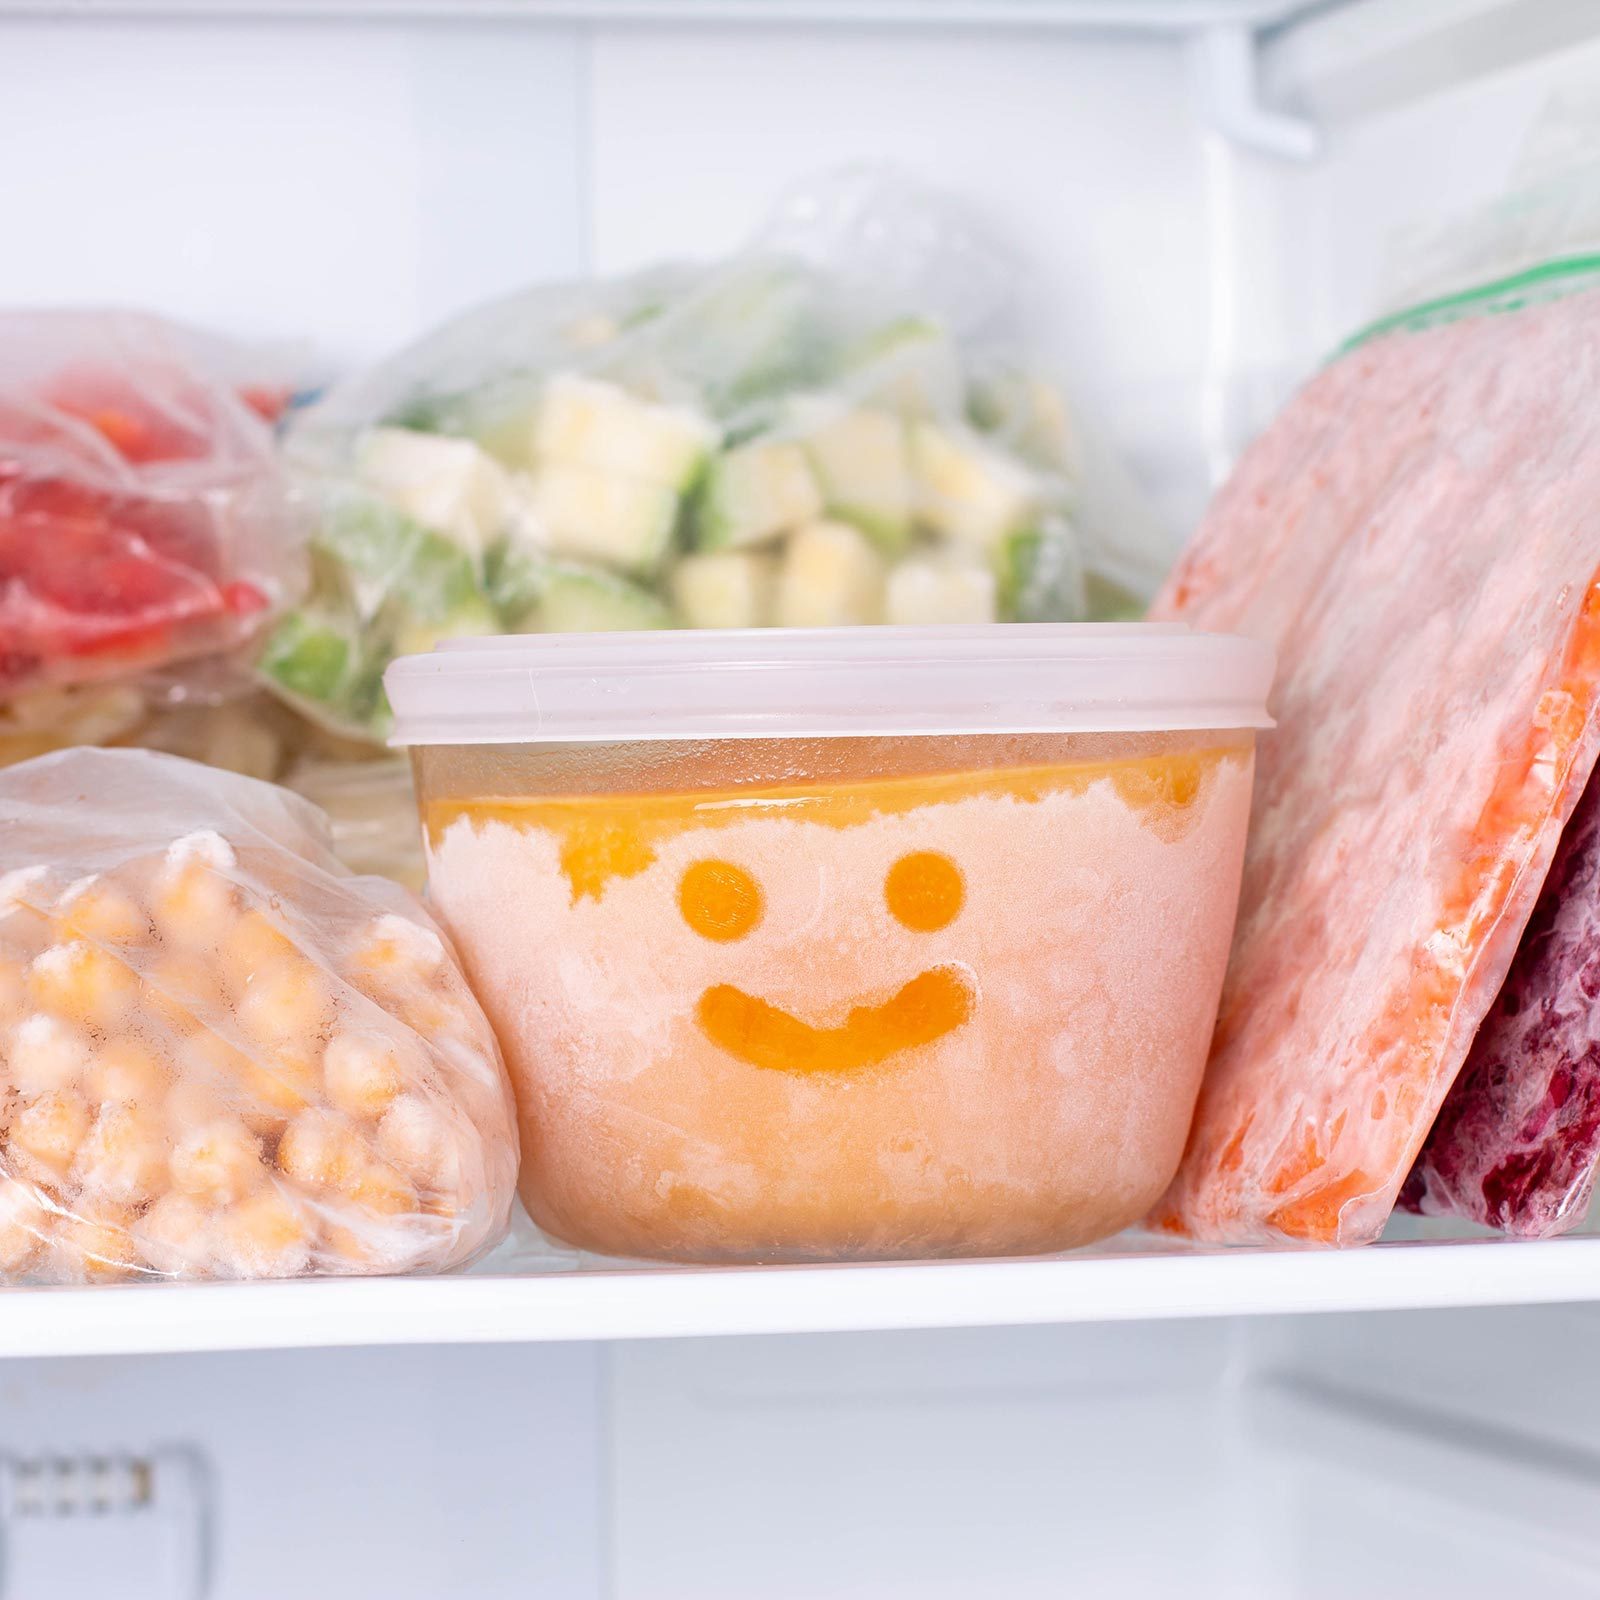 Frozen Food In The Freezer with smiley face drawn on frozen food storage bowl